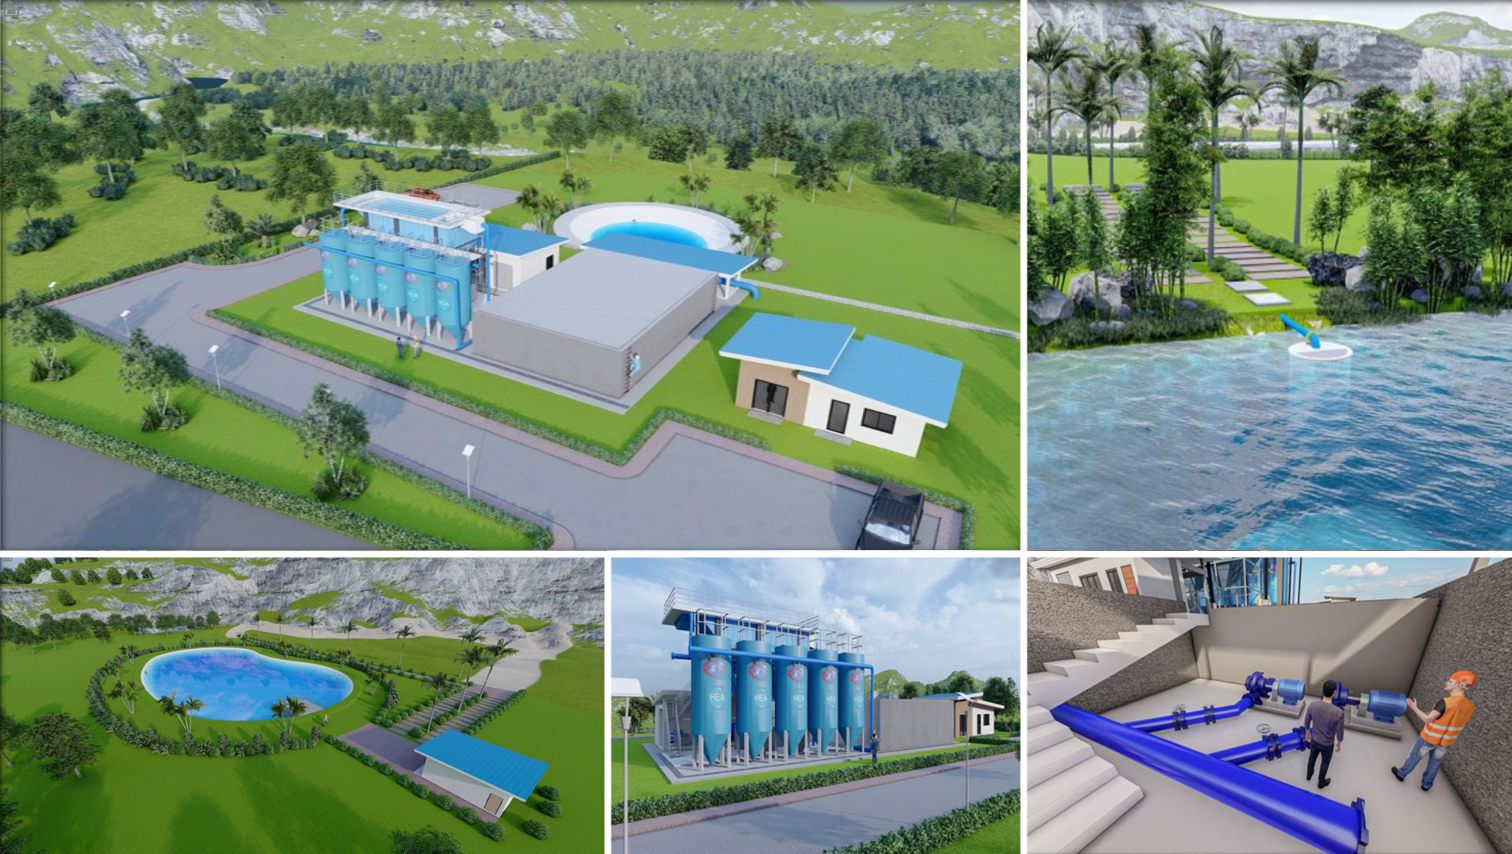 PROJECT WATCH: JE Hydro & Bio-Energy Corporation to put up 5 MLD Level III Water Supply Project in Balubal, CDO